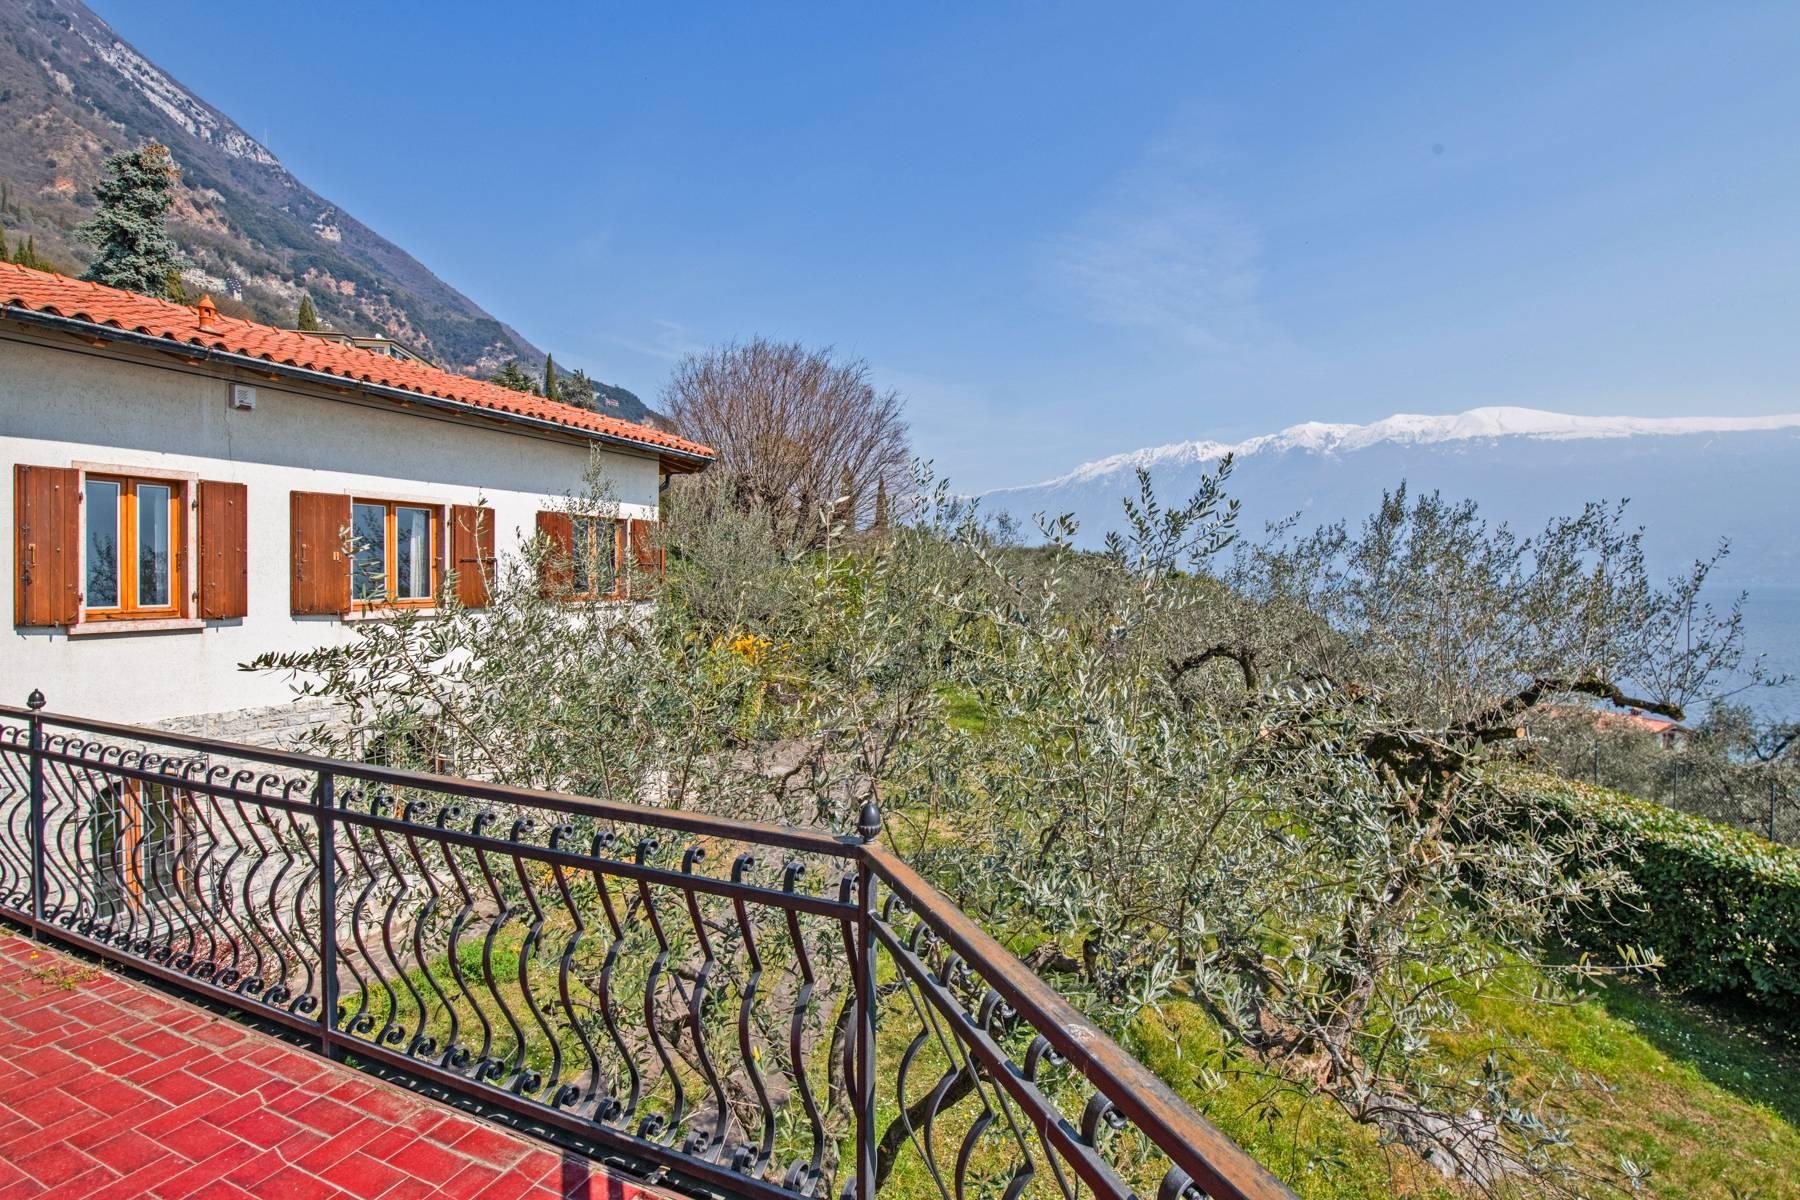 Villa with lake view in Gargnano surrounded by olive trees - 36